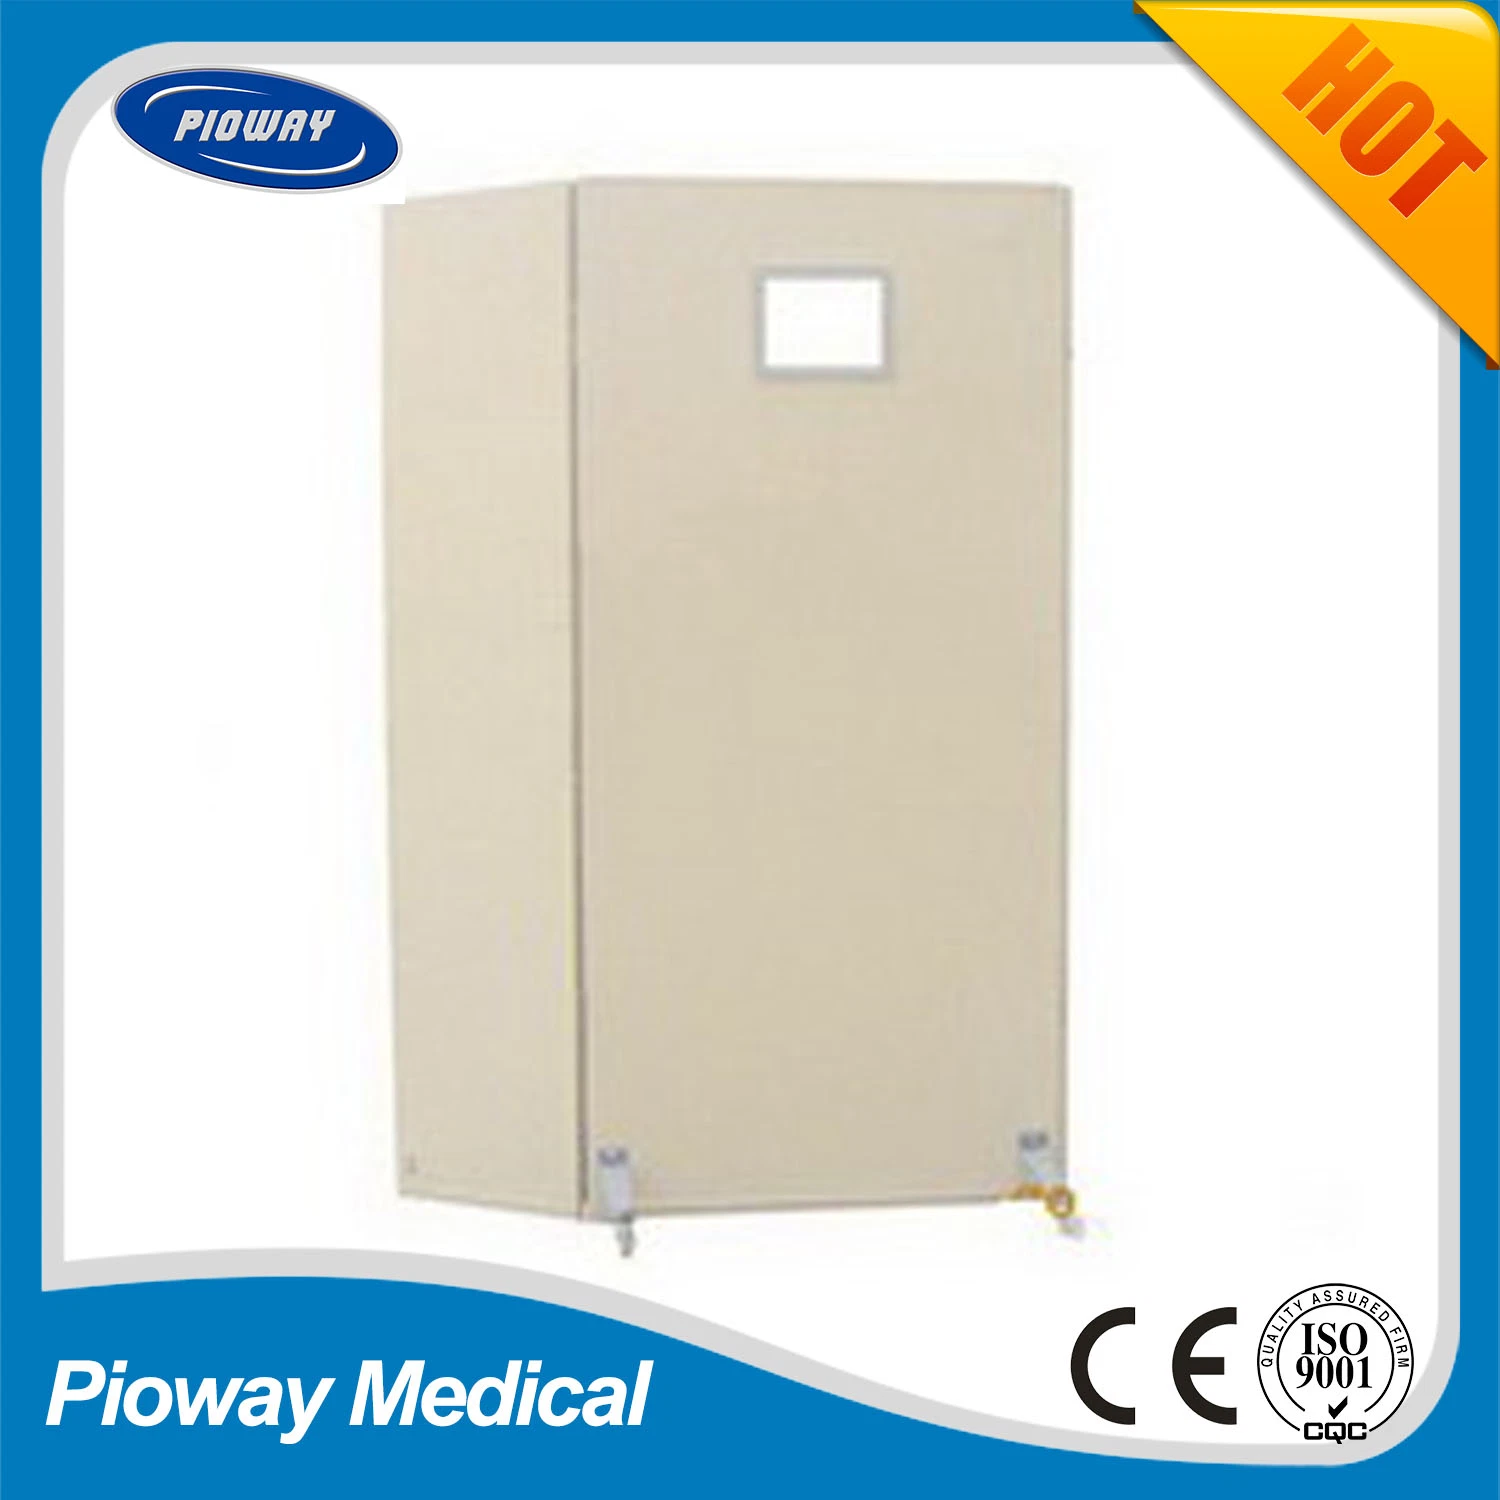 Medical X-ray Protective Lead Screen, with Windows and Castors